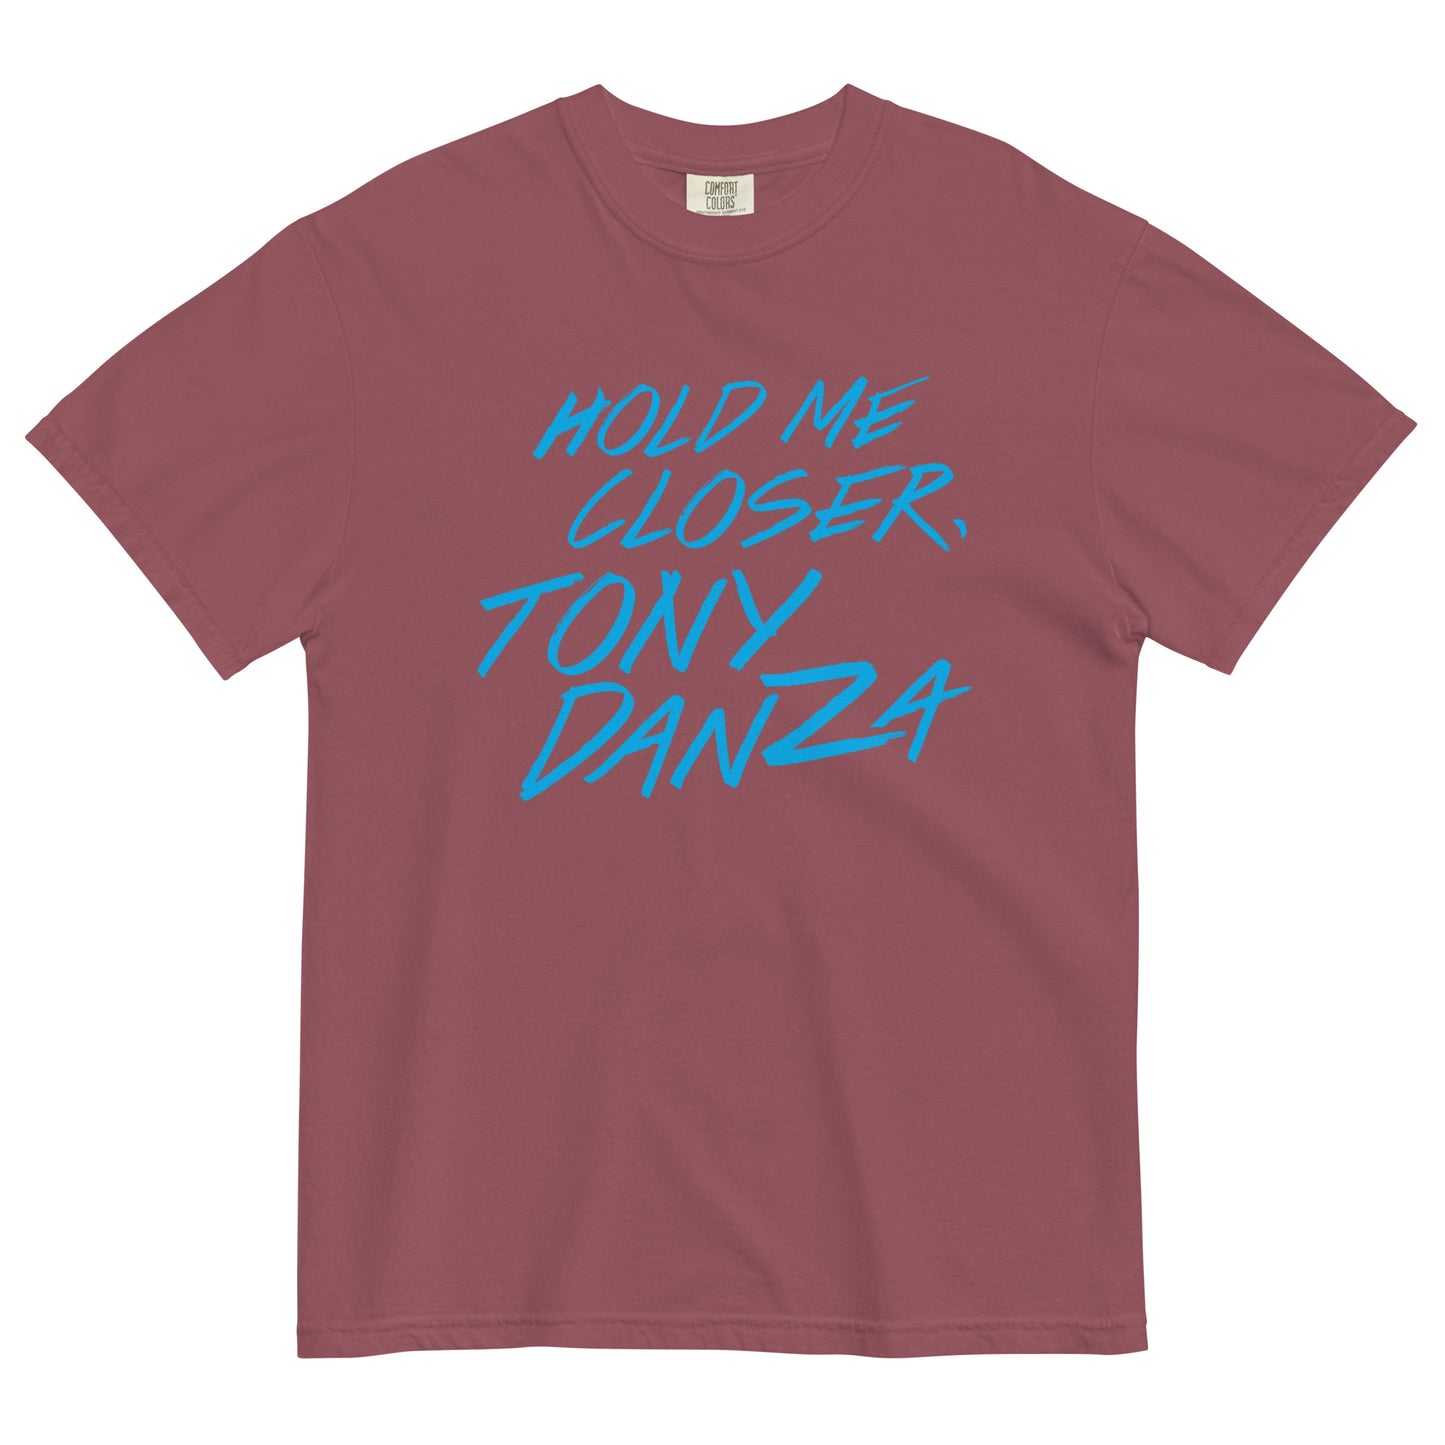 Hold Me Closer, Tony Danza Men's Relaxed Fit Tee